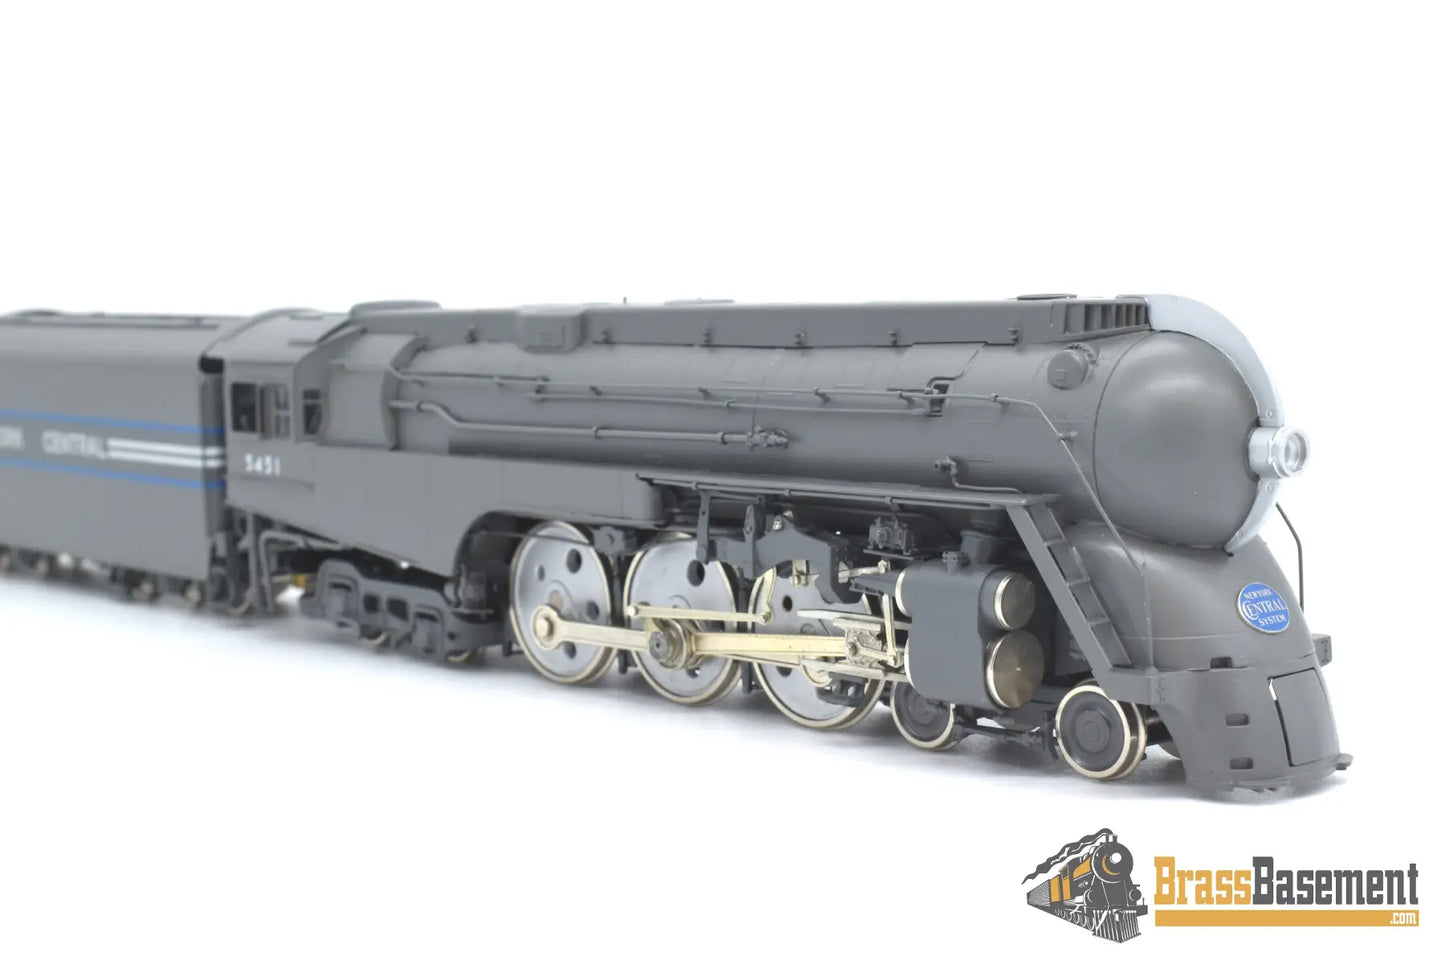 Ho Brass - Key Imports New York Central 4 - 6 - 4 Hudson #5451 20Th Century Limited Steam